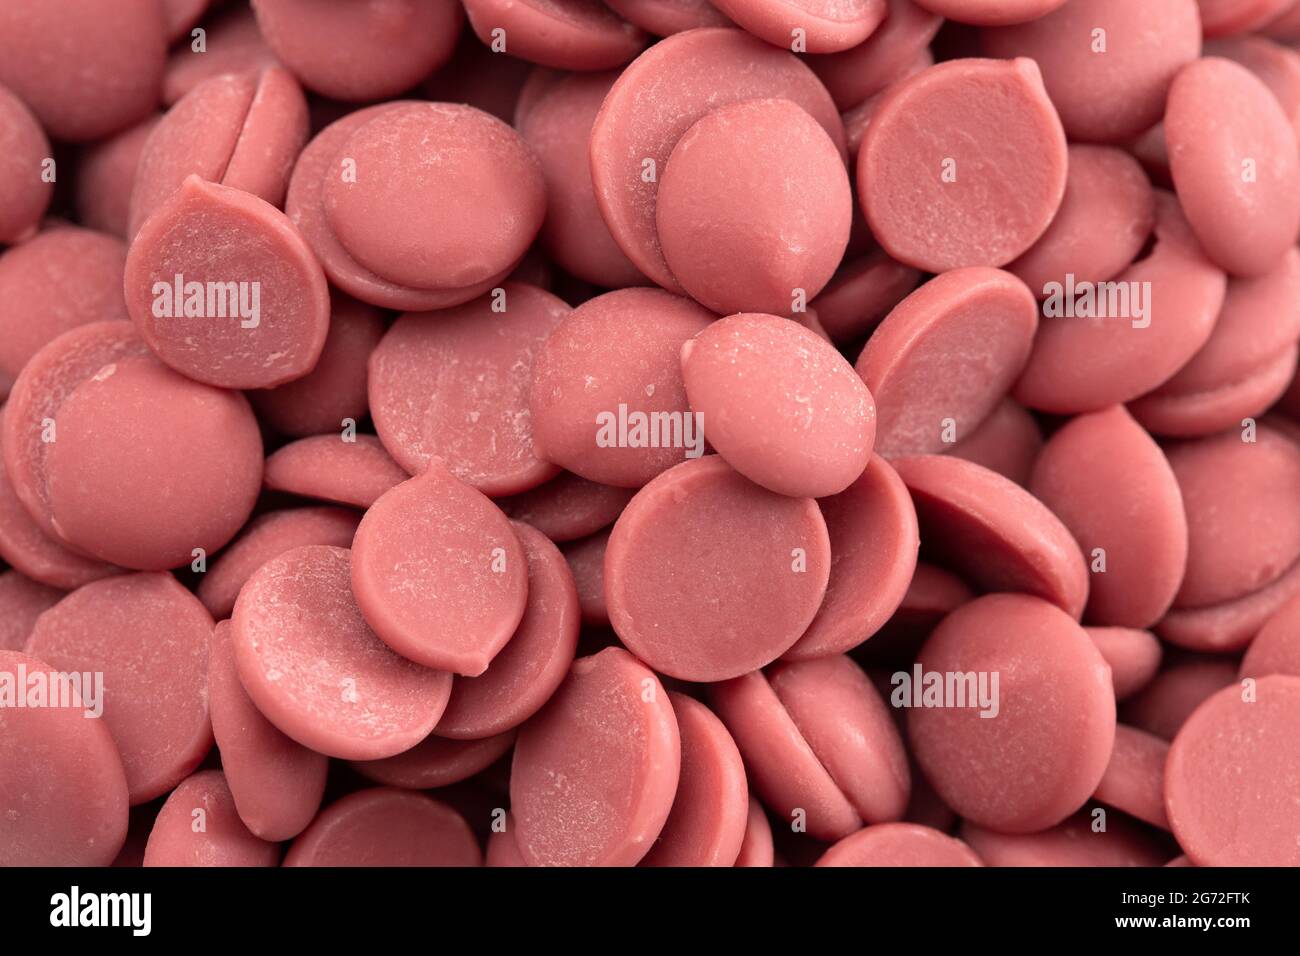 A Background of Authentic Ruby Chocolate Drops Stock Photo